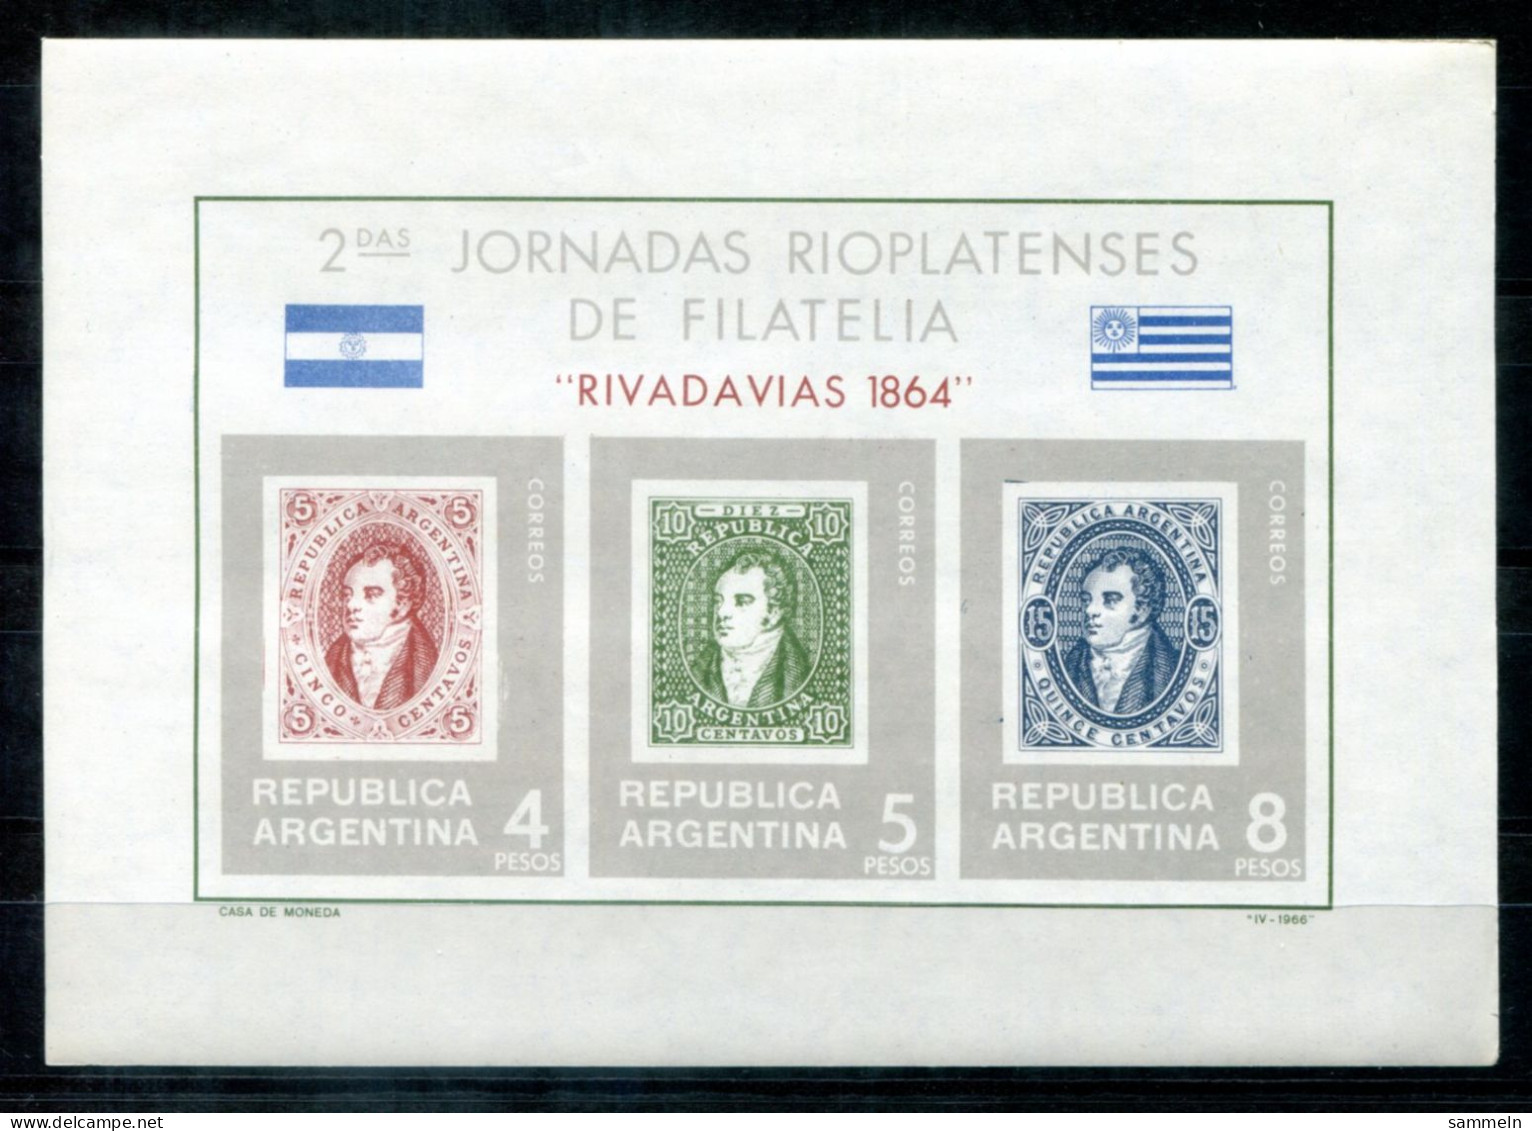 ARGENTINIEN Block 16, Bl.16 Mnh (see TEXT!!)- Marke Auf Marke, Stamp On Stamp, Timbre Sur Timbre - ARGENTINA / ARGENTINE - Blocs-feuillets